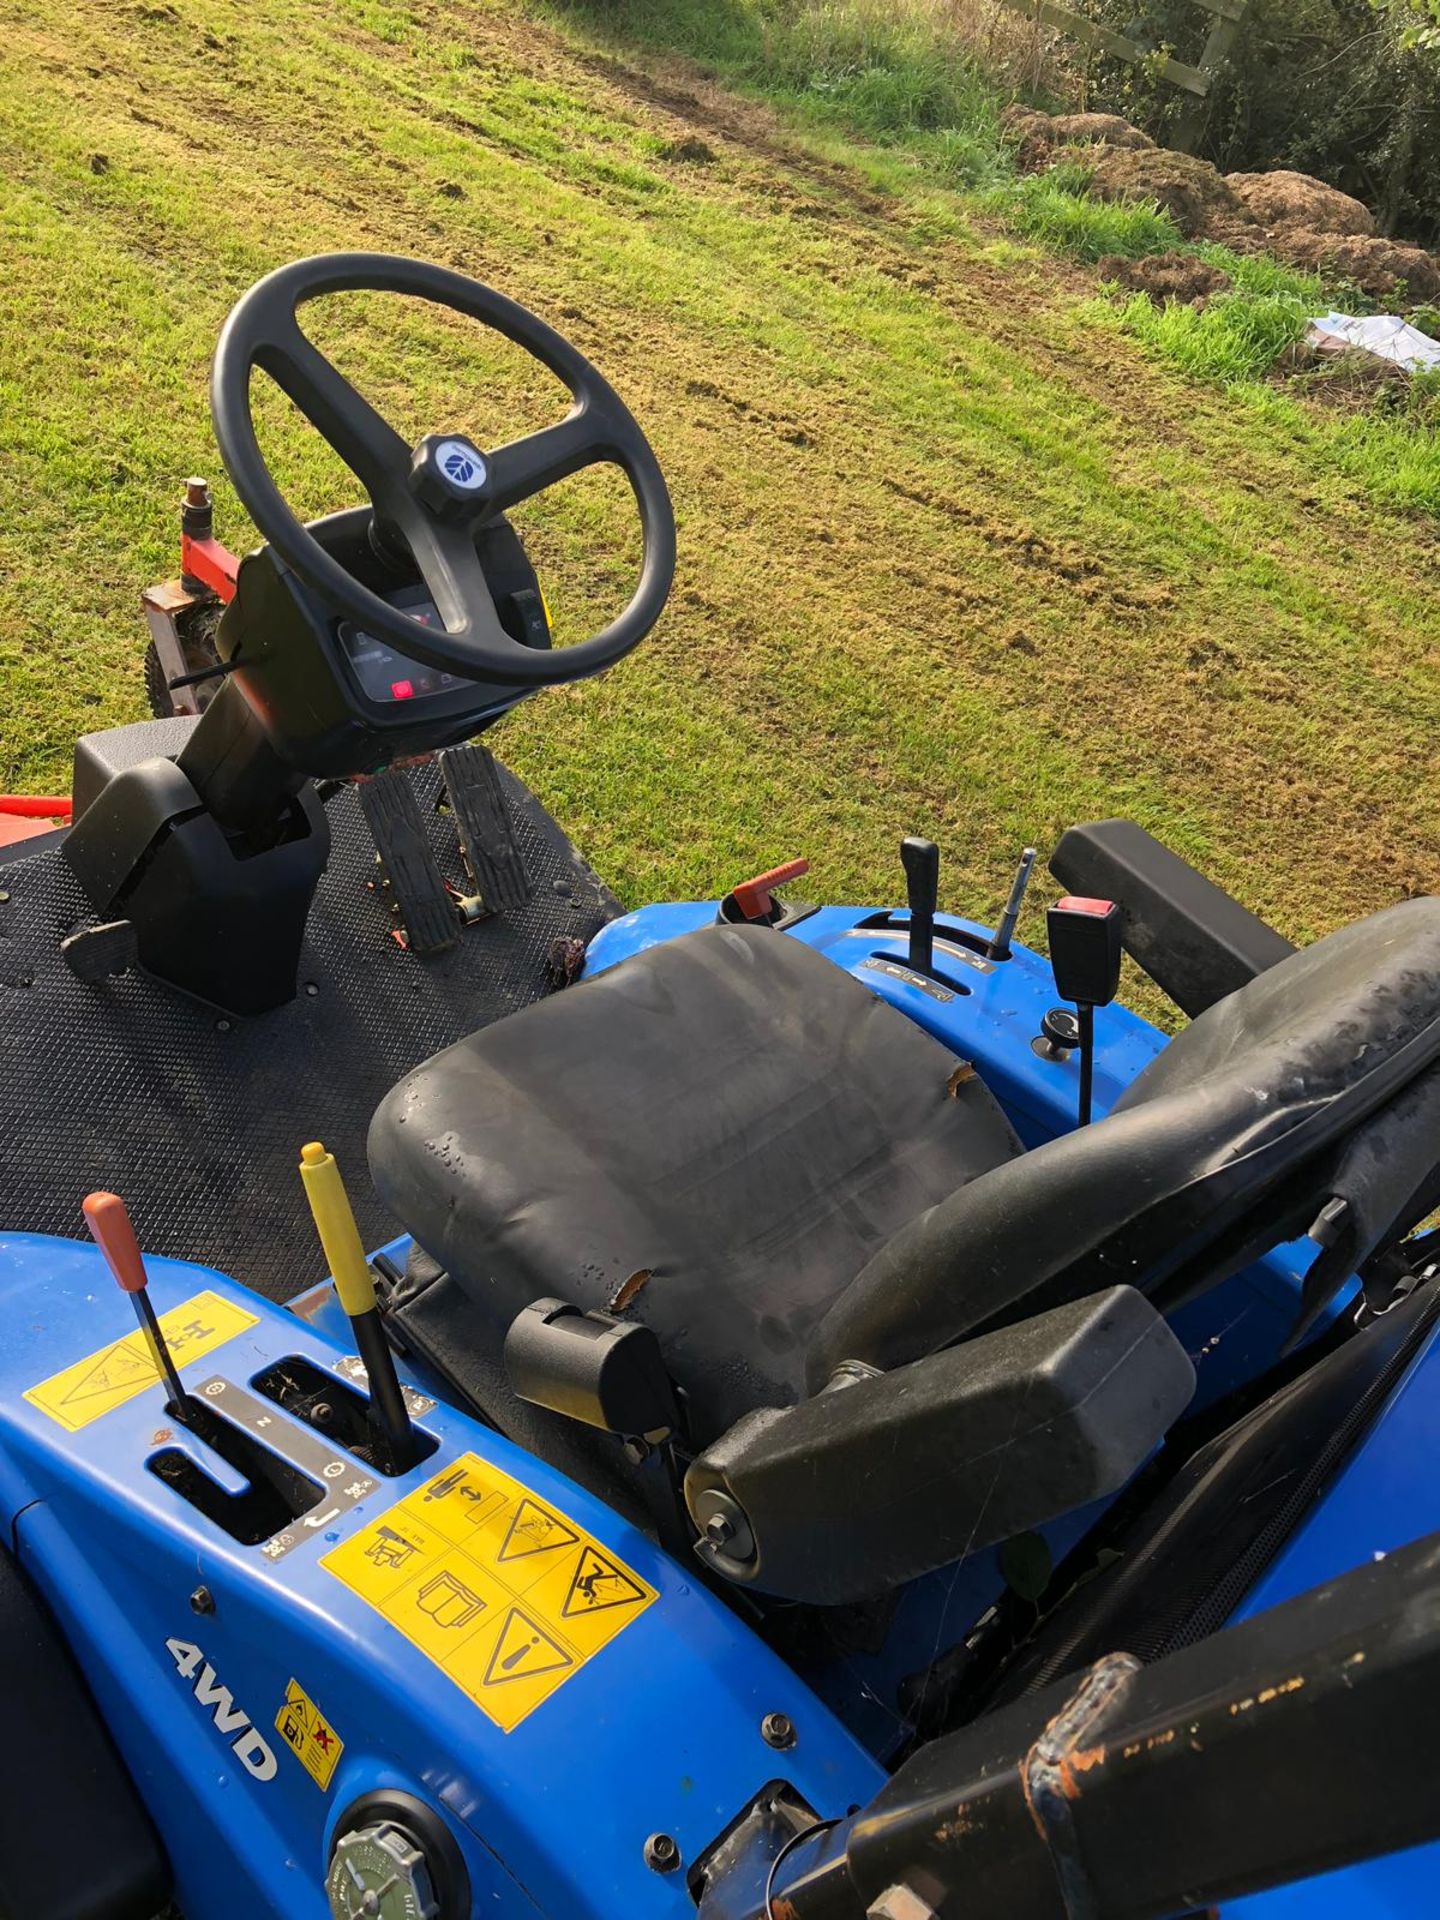 2010/60 REG NEW HOLLAND MC35 4WD RIDE ON LAWN MOWER LOW HOURS *PLUS VAT* - Image 10 of 21